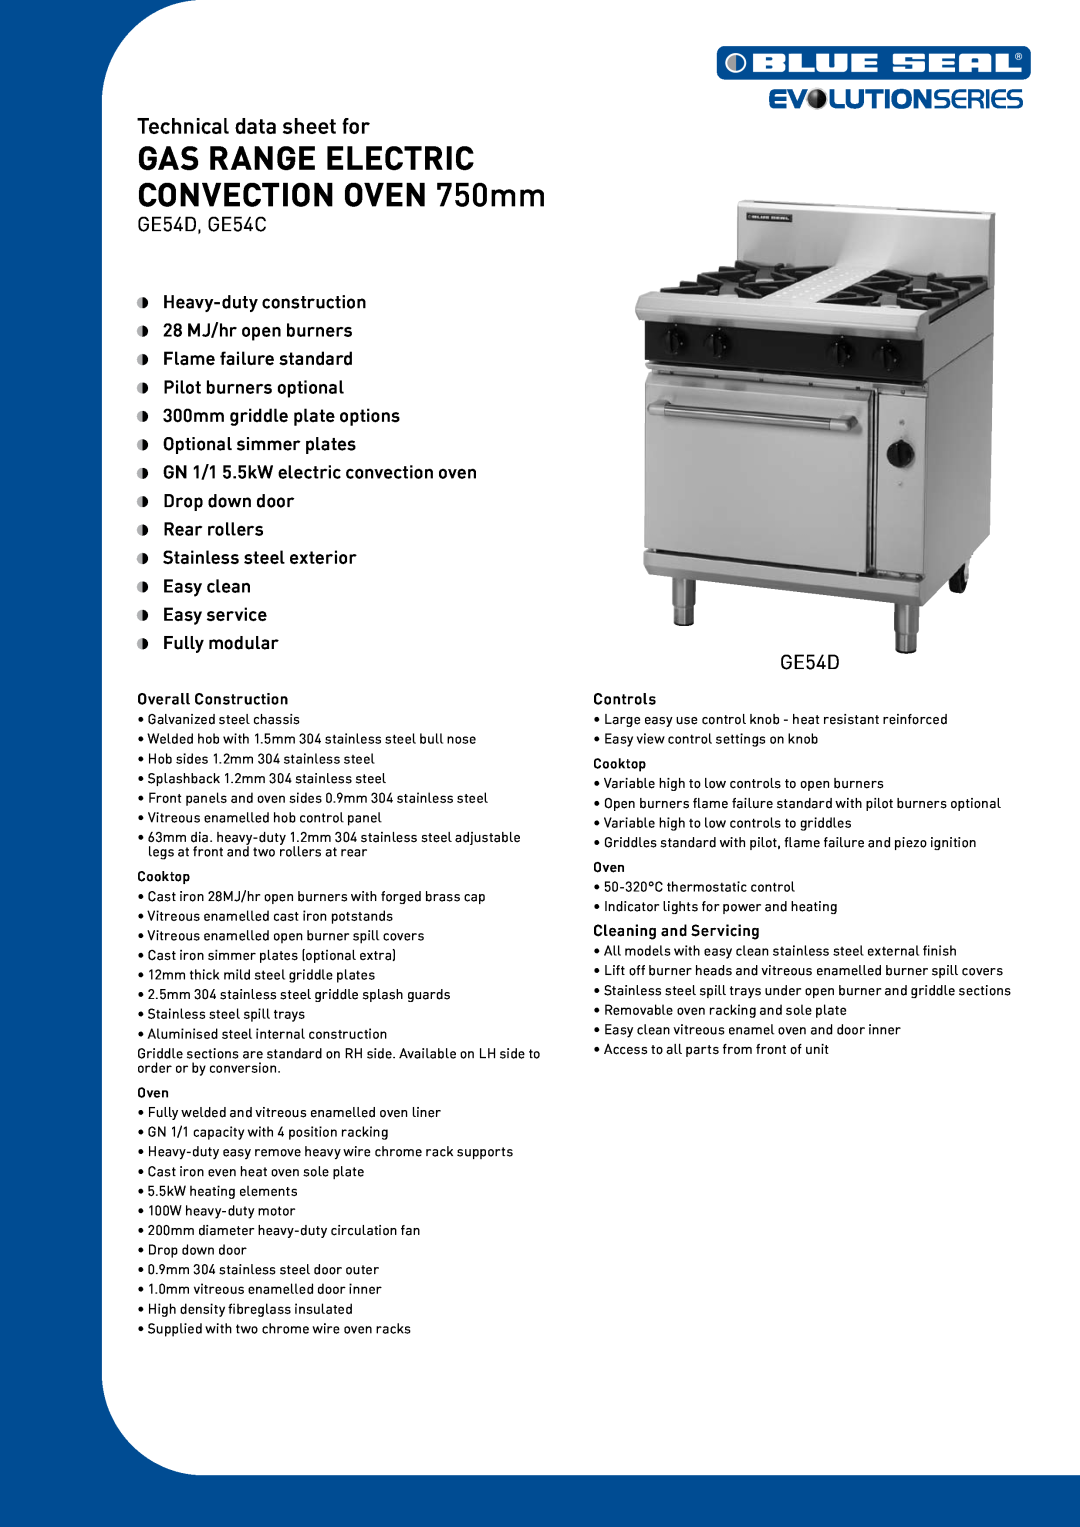 Moffat GE54C manual GAS RANGE ELECTRIC CONVECTION OVEN 750mm, Technical data sheet for, Overall Construction, Controls 